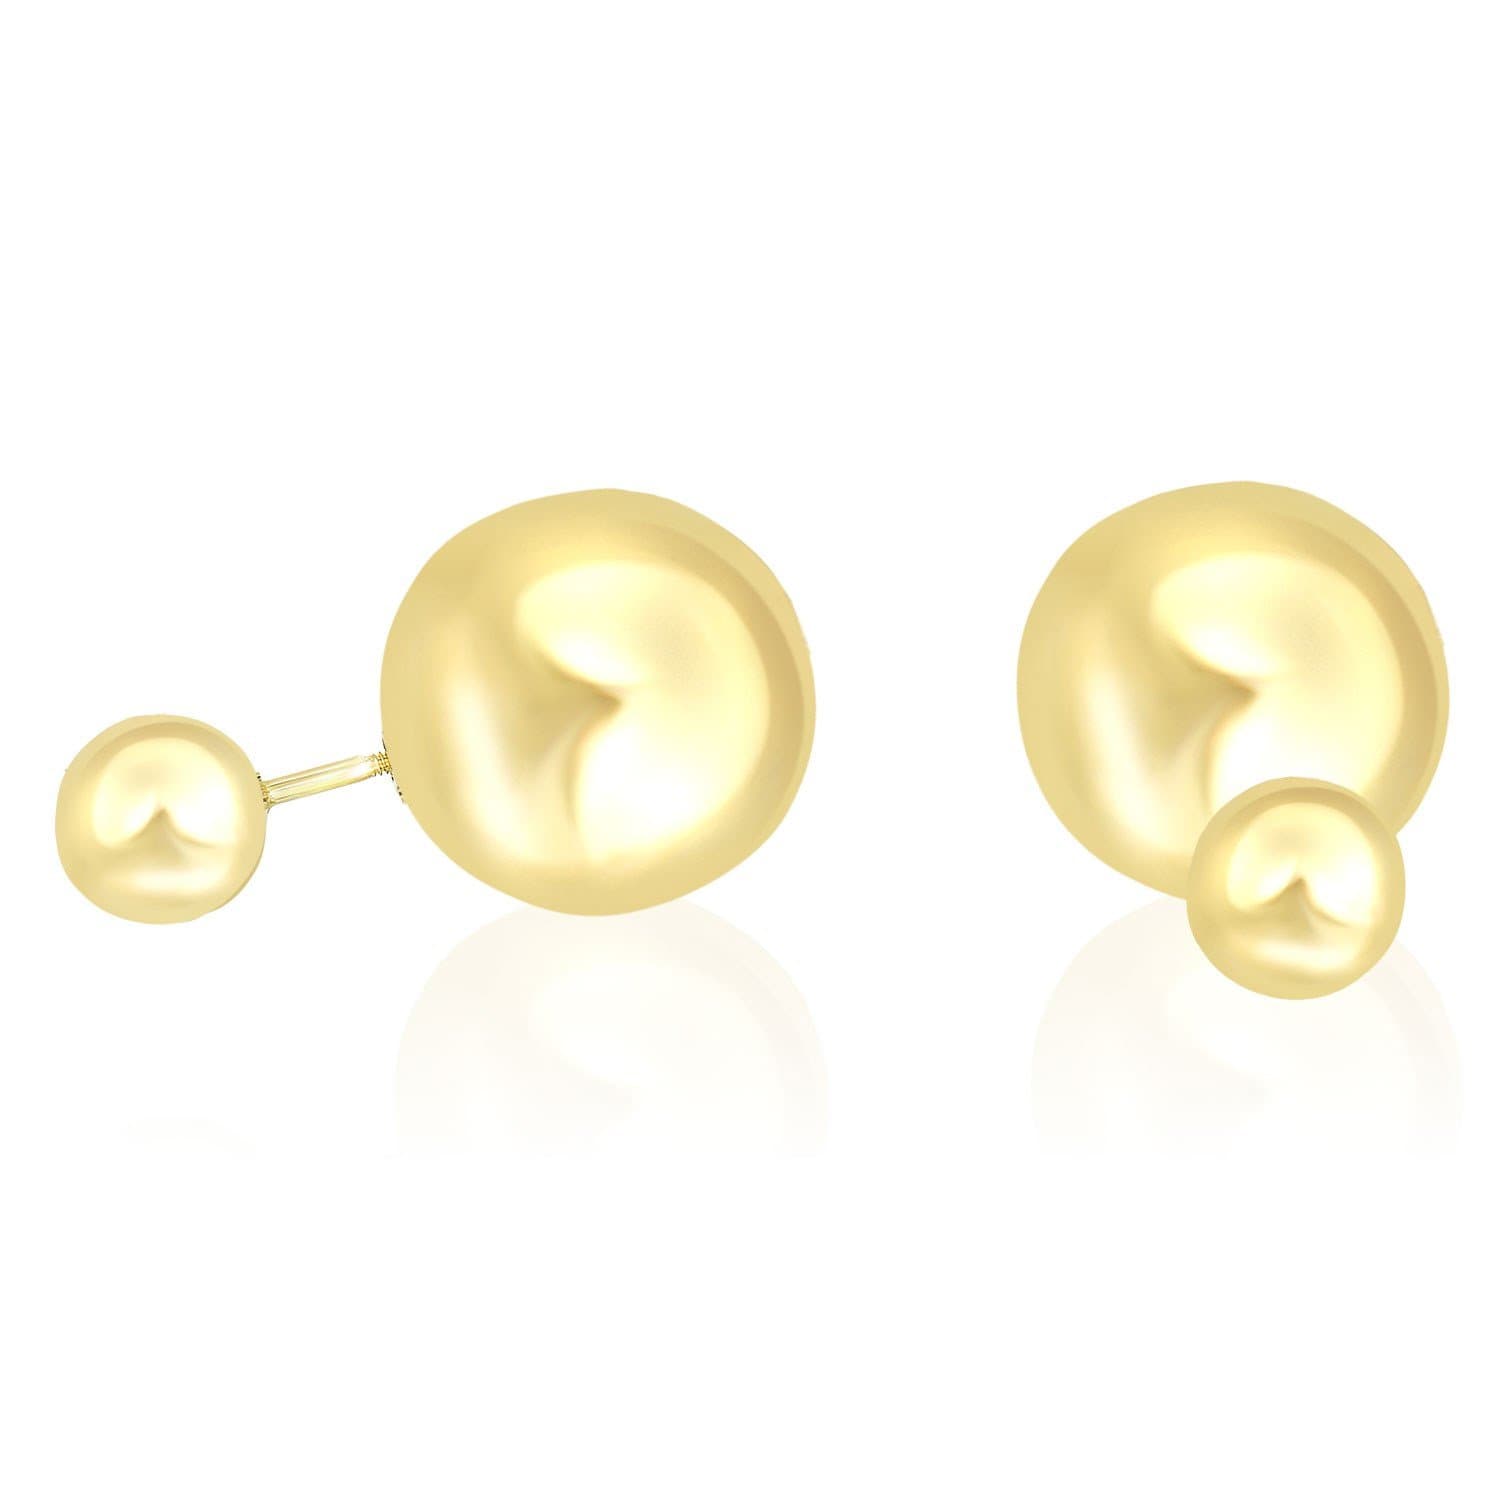 14k Yellow Gold Shiny Ball Design Double Sided Earrings